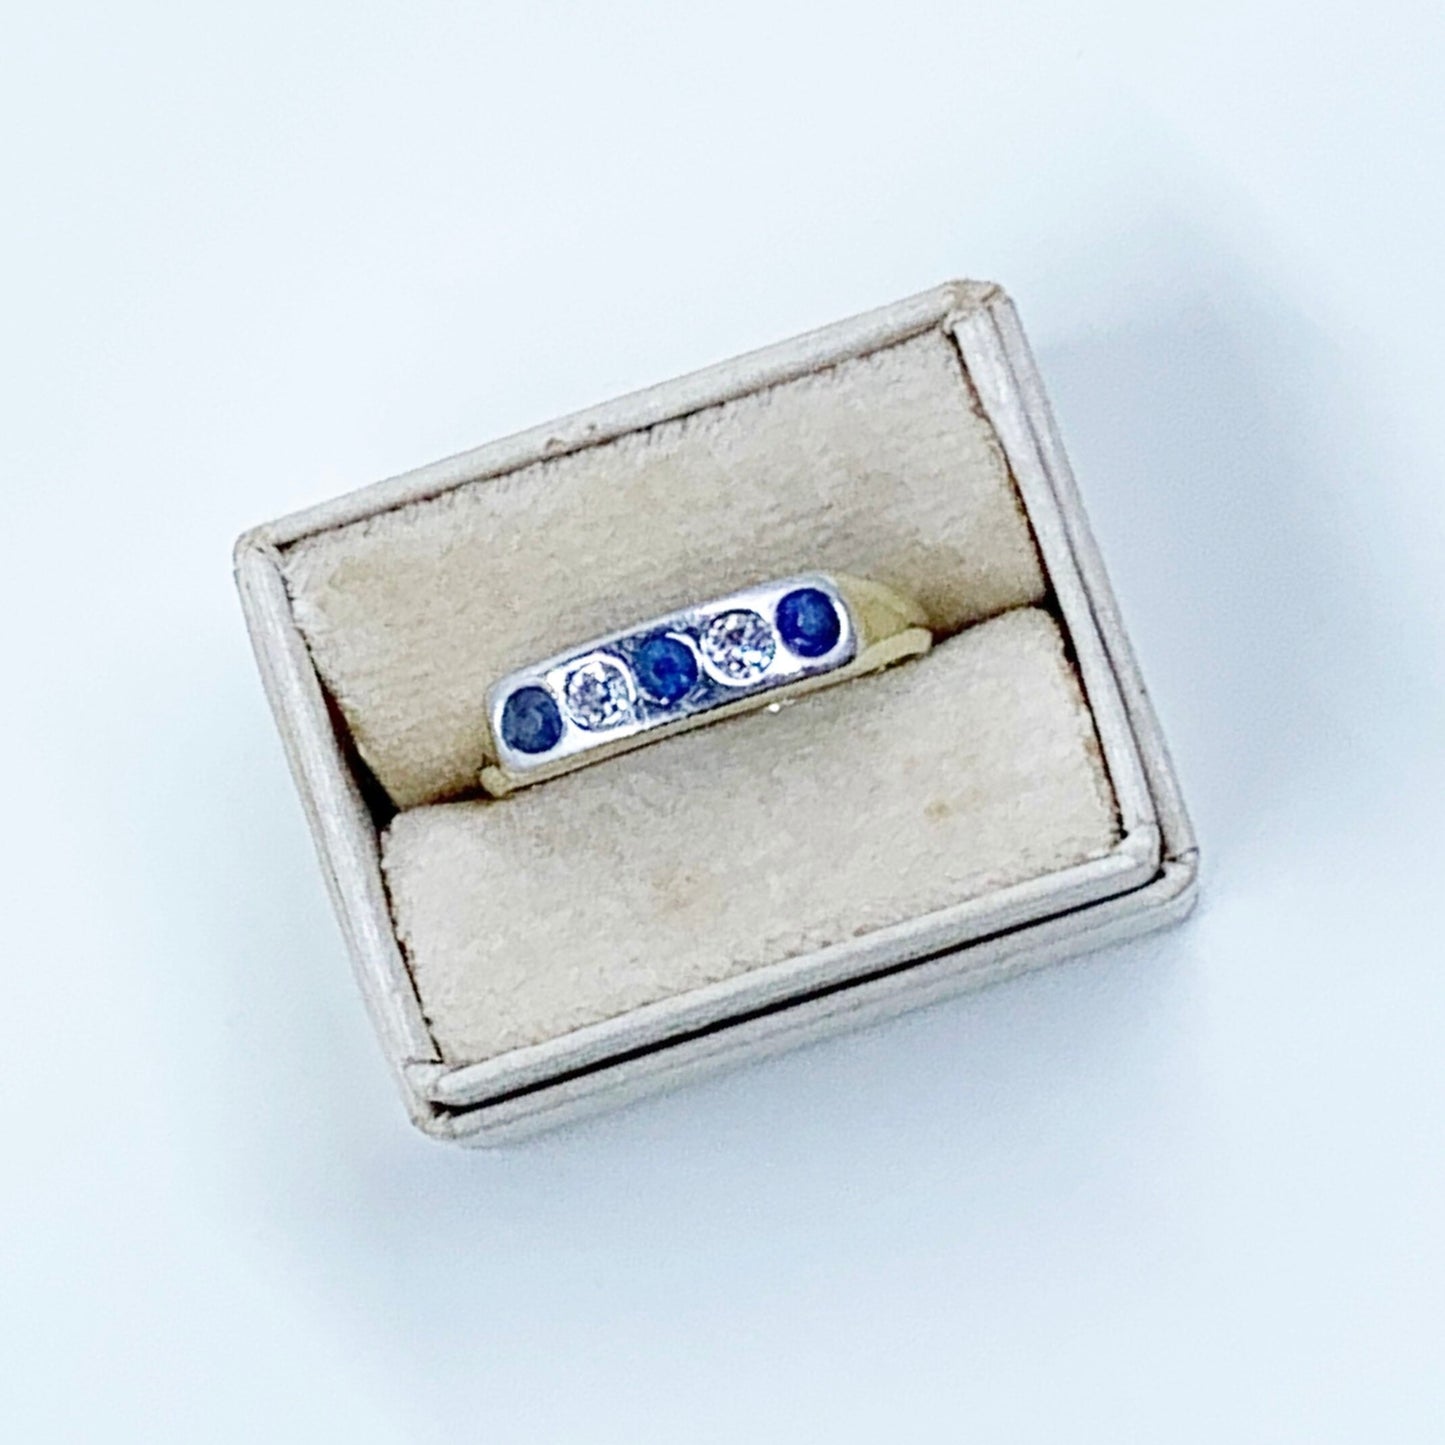 Vintage Diamond and Sapphire 5 Stone Ring | White and Yellow Gold Stackable 15k Ring | Size 5.75 Ring